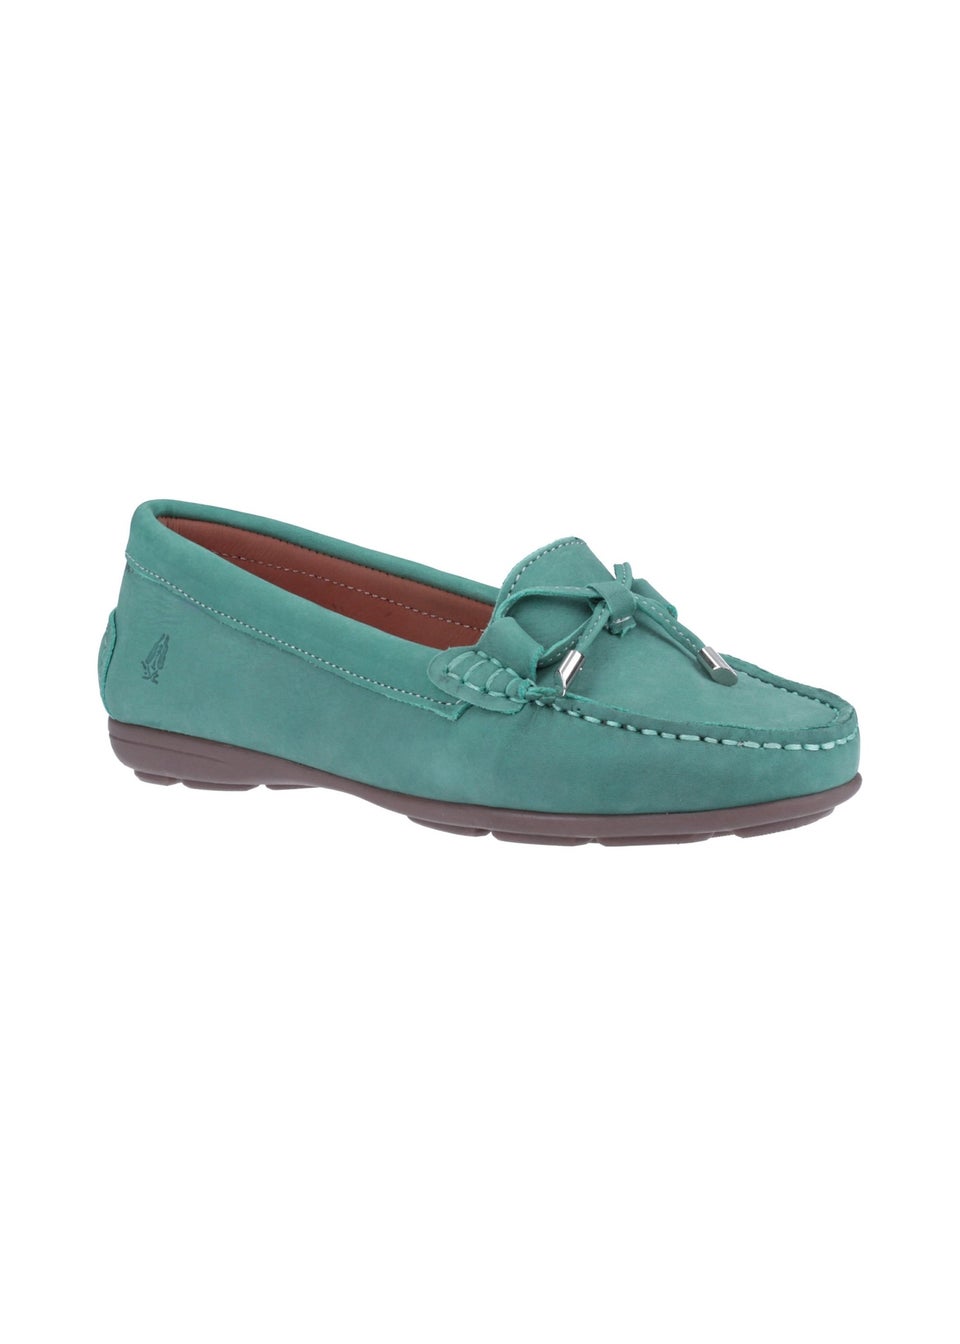 Hush Puppies Blue Maggie Toggle Shoe